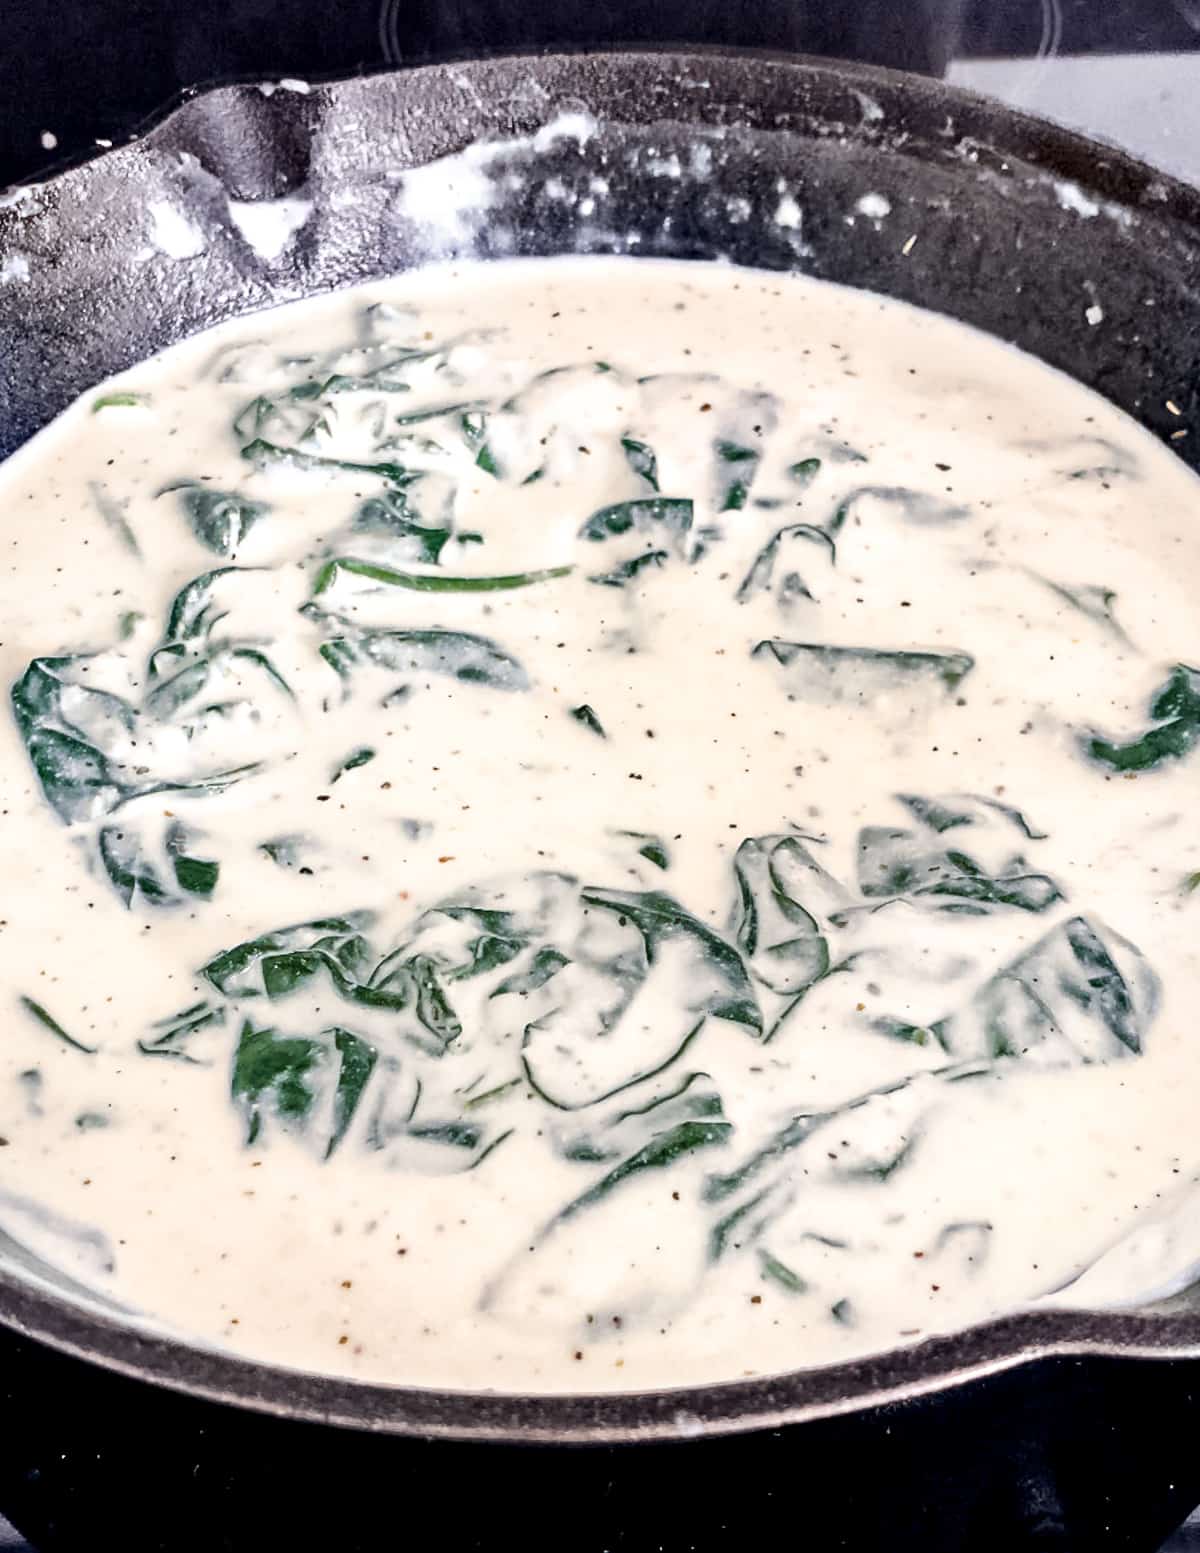 The finished ricotta spinach sauce in a pan.